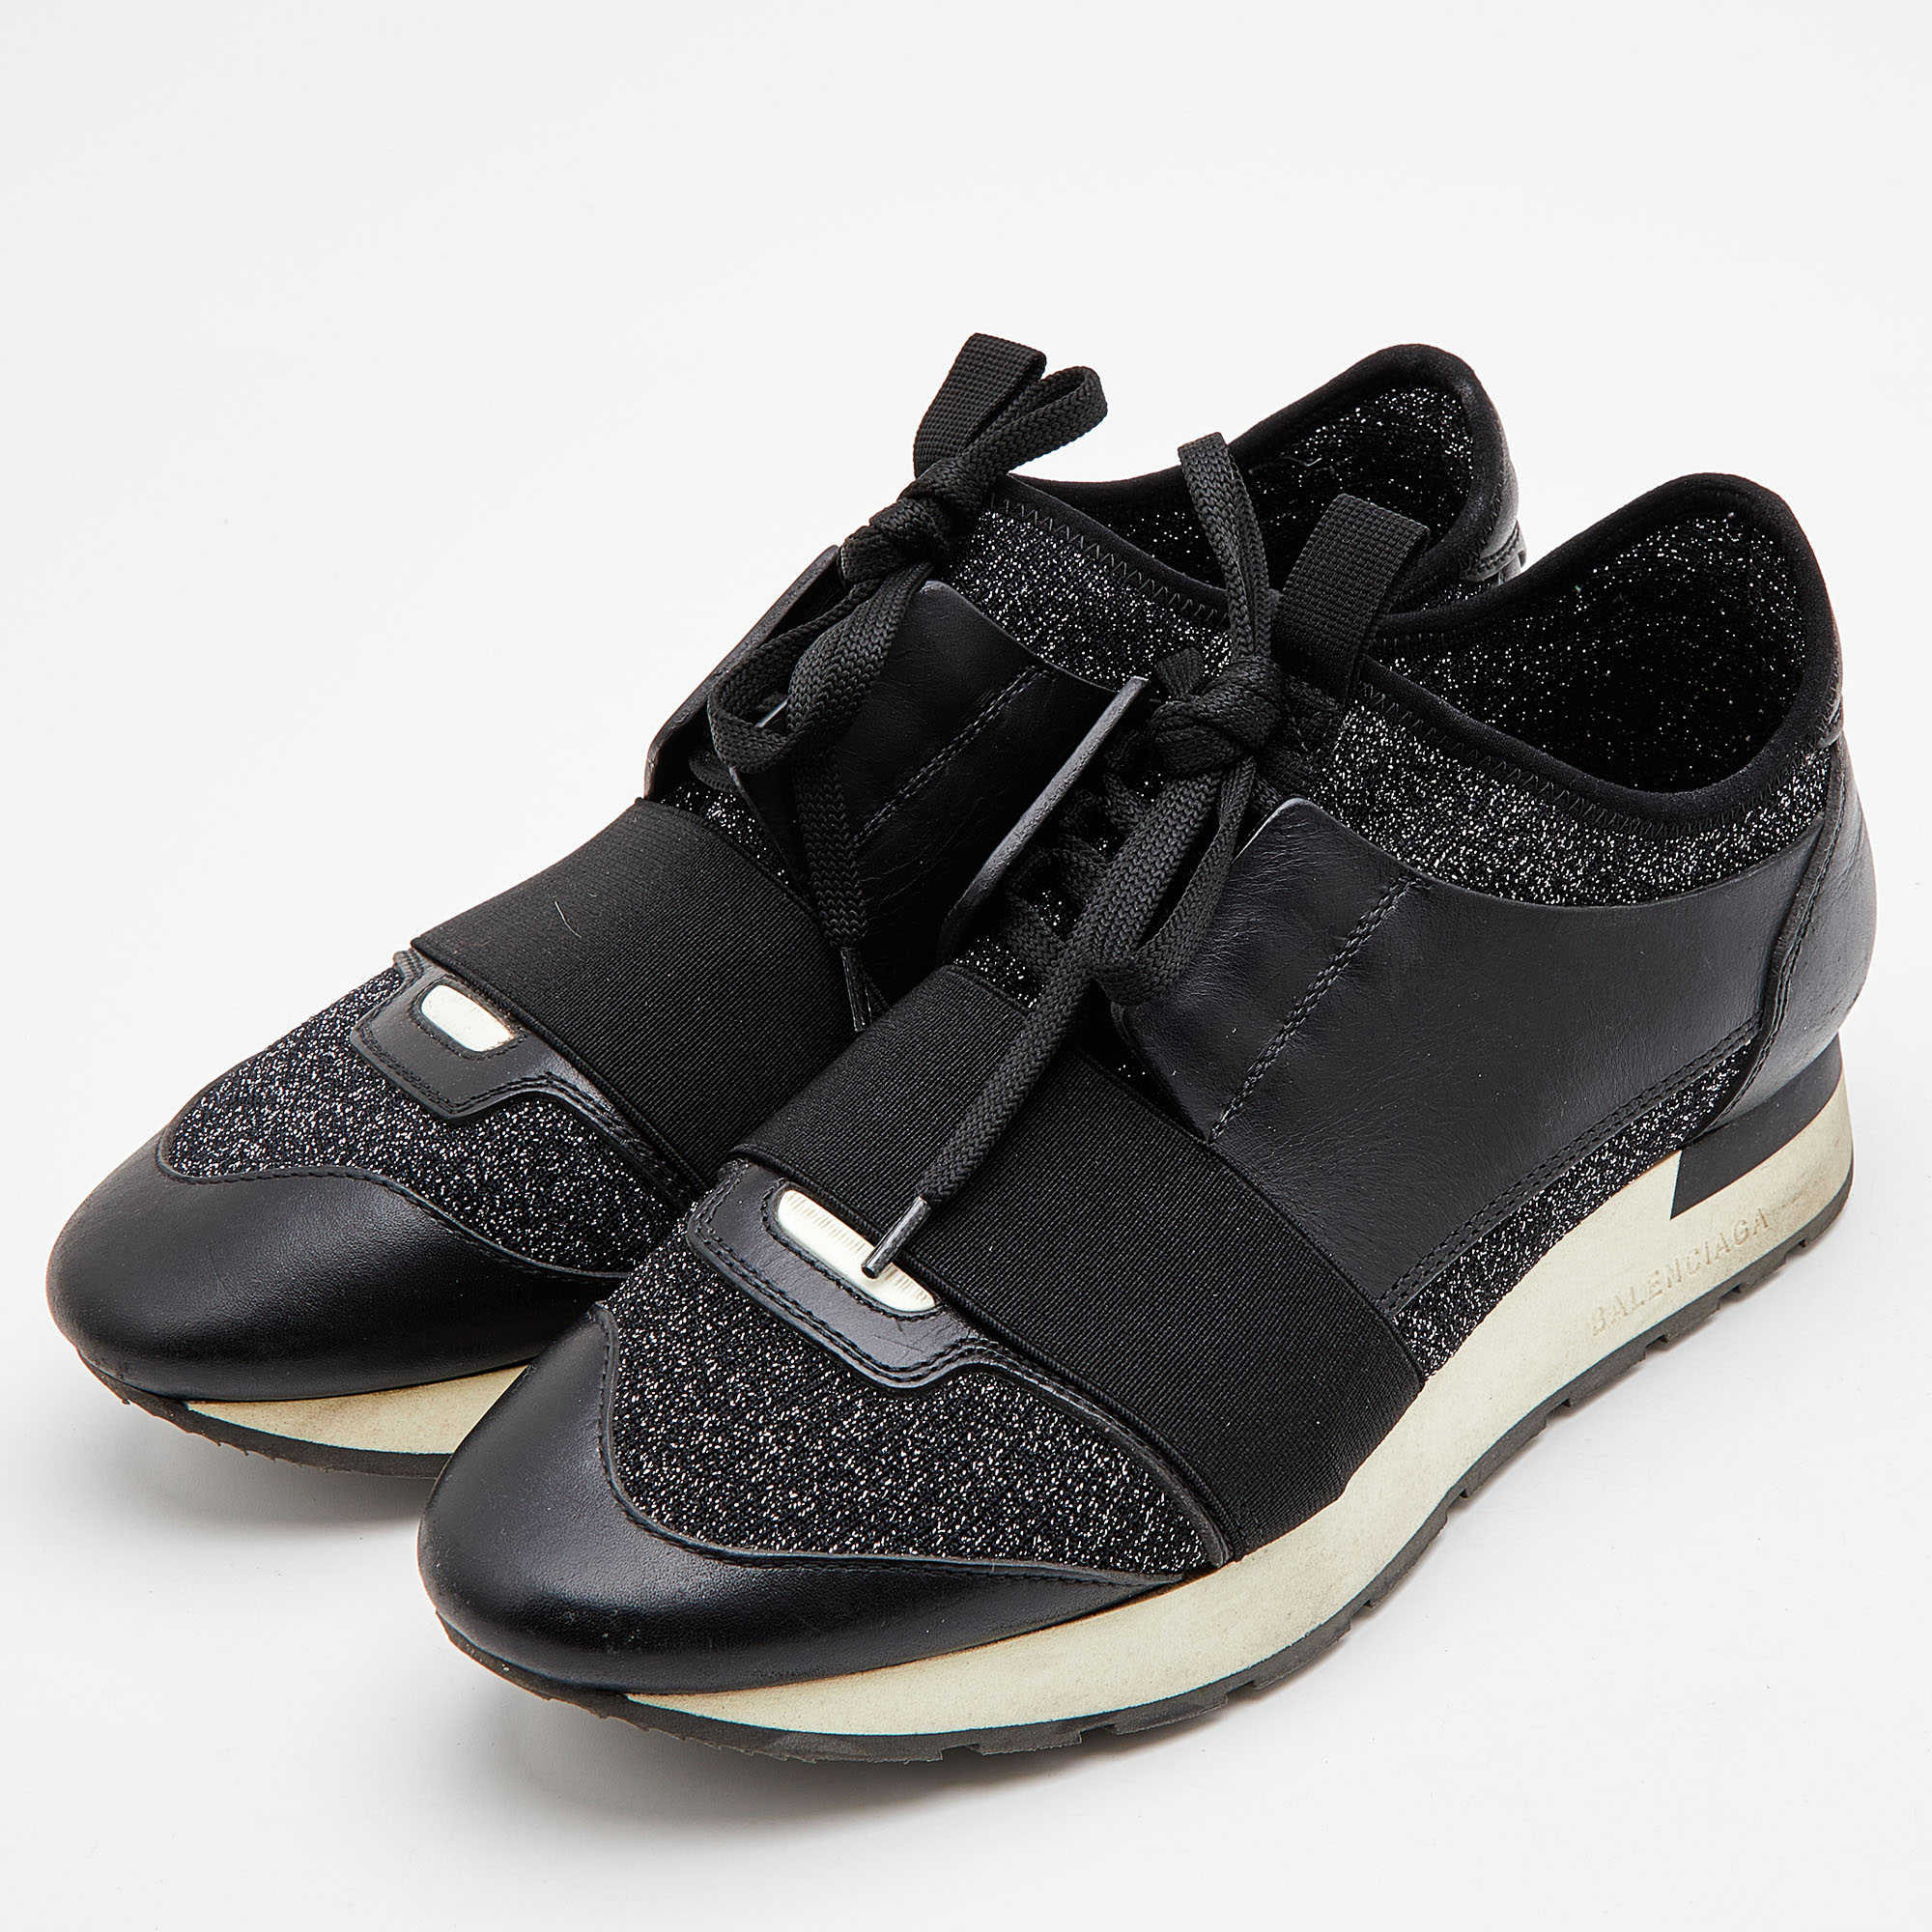 

Balenciaga Black Leather, Metallic Knit Fabric and Stretch Band Race Runner Sneakers Size